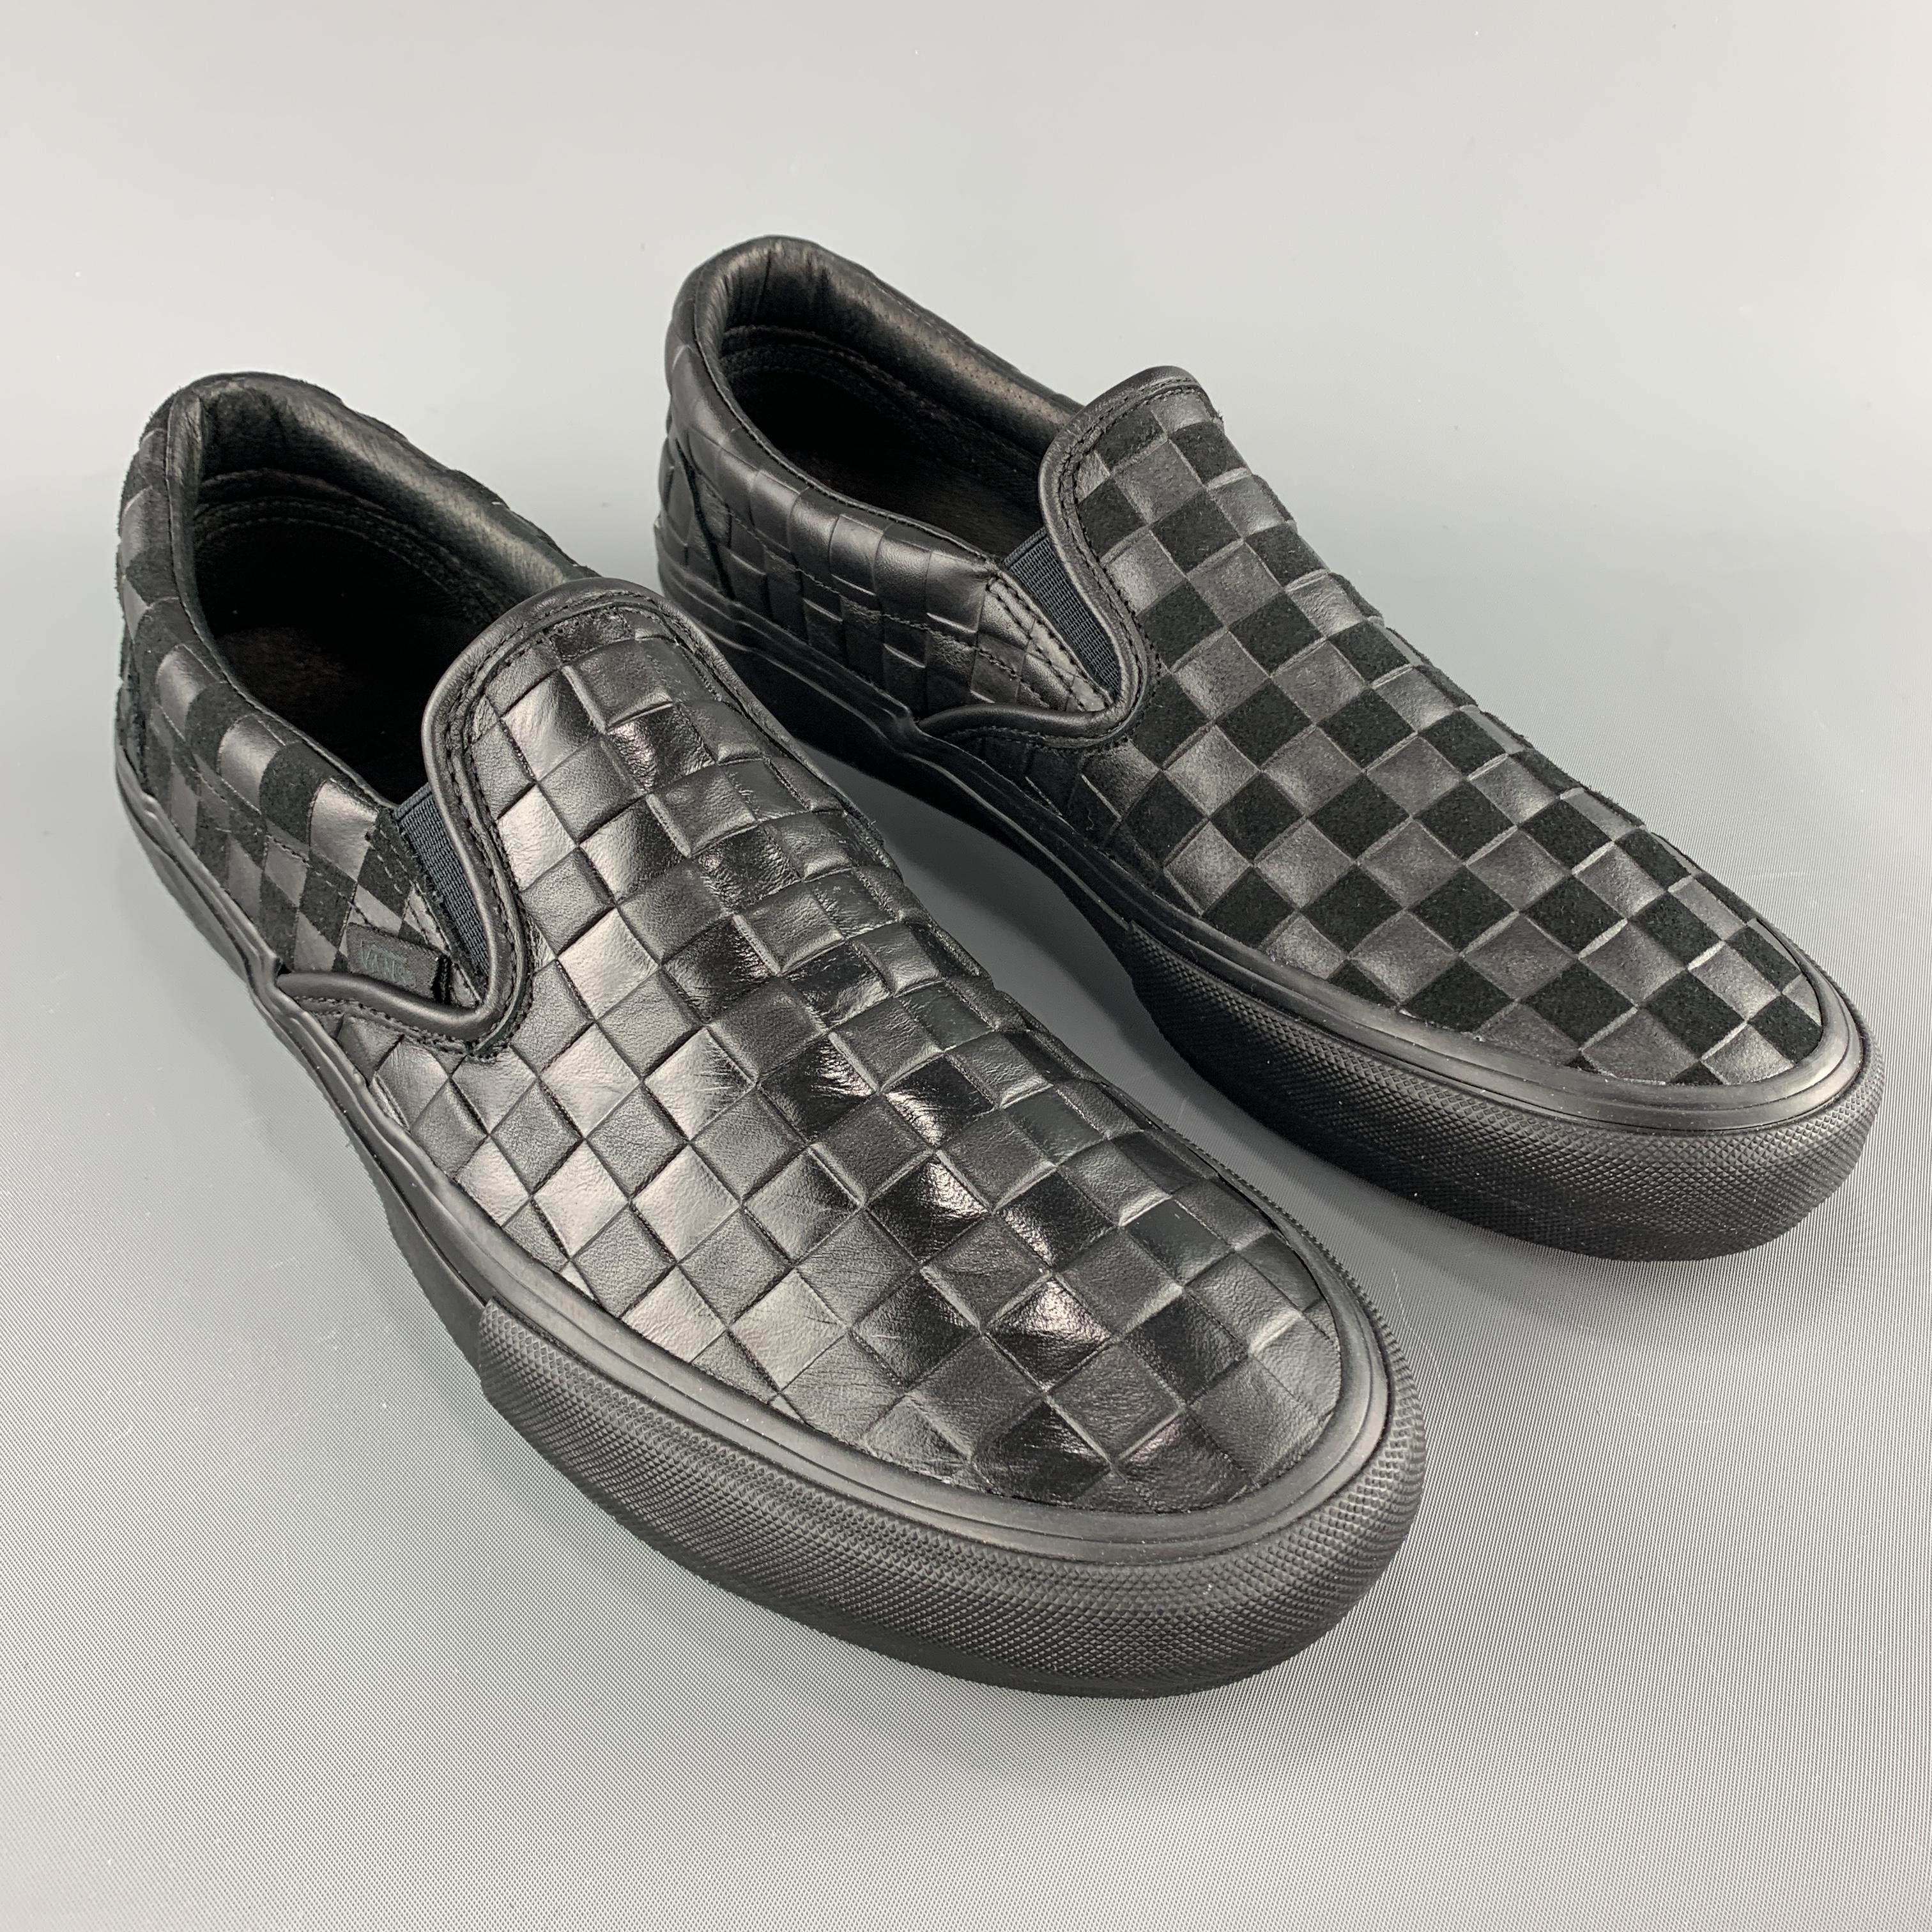 VANS x ENGINEERED GARMENTS Spring Summer 2019 slip on sneakers come in black checkered embossed leather with one sueded front panel, one sueded heel panel, and tonal rubber sole. 

New with Box. 
Marked: 9.5 